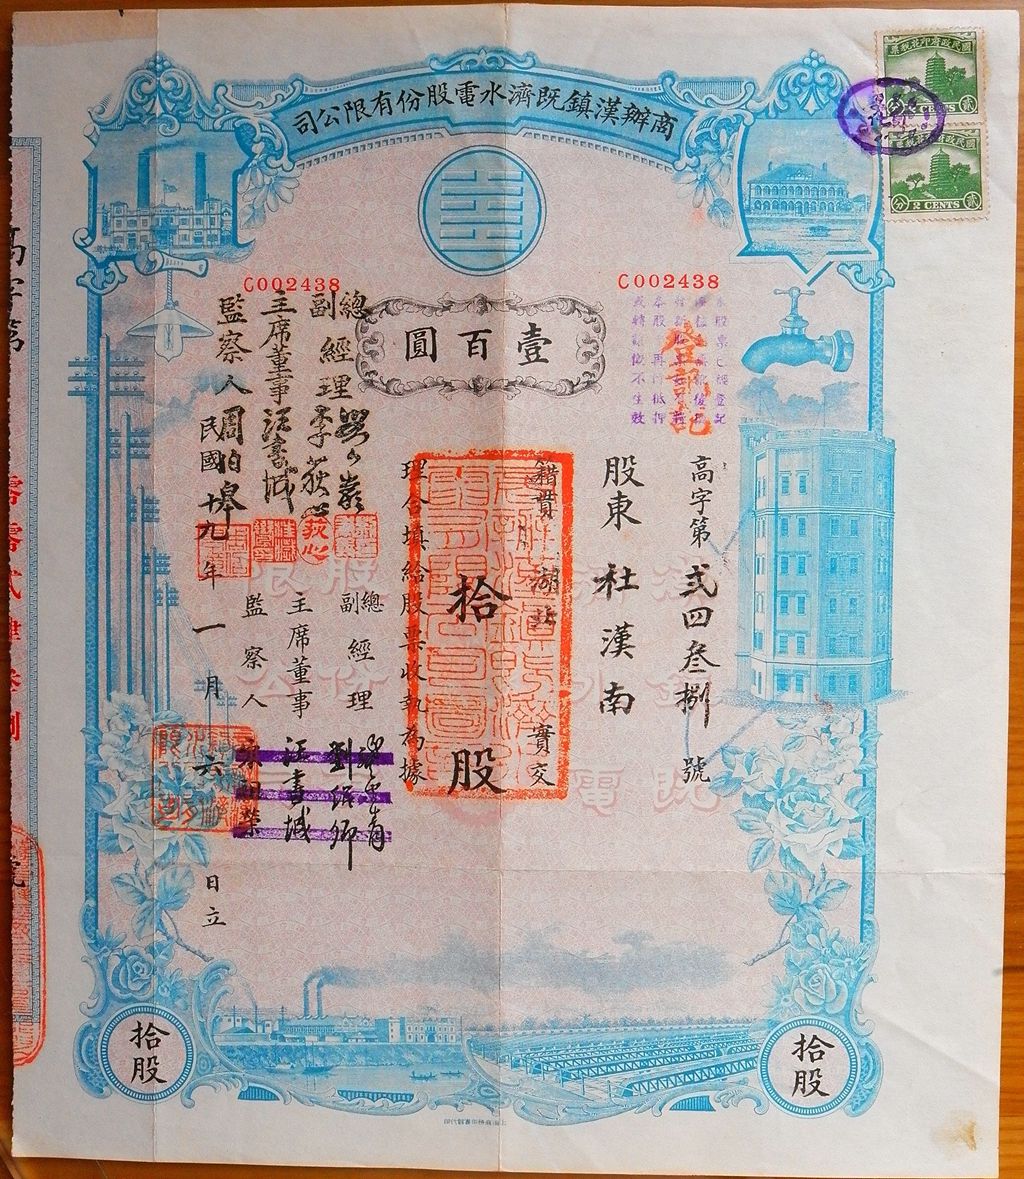 S0301, Hanhow Waterworks & Electric Light Co., Stock Certificate 10 Shares, China 1930